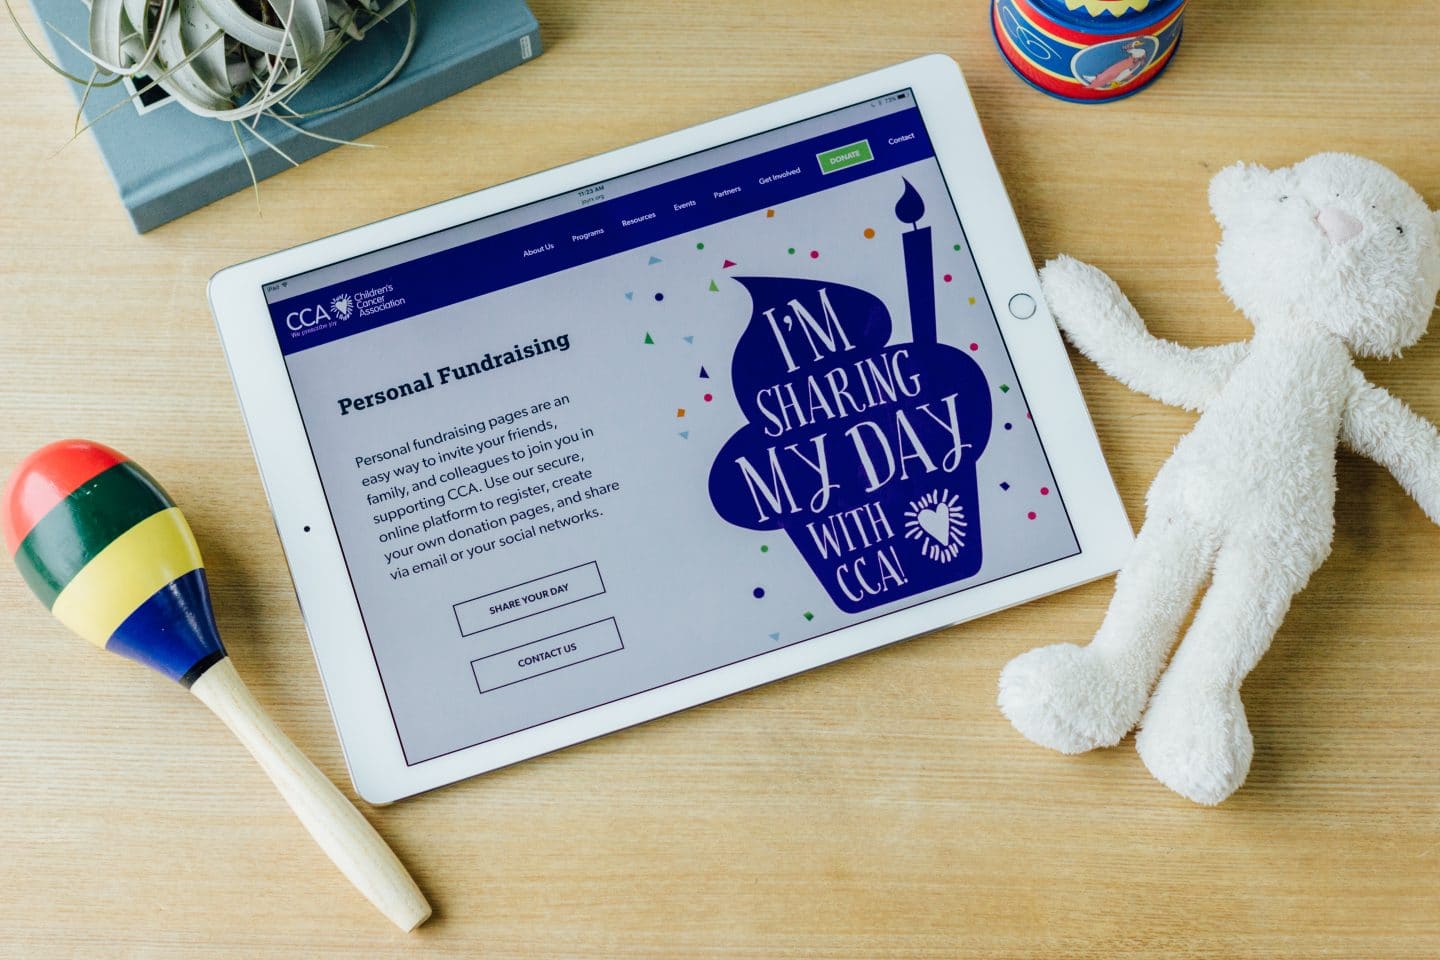 The Children's Cancer Association's responsive website shown on an iPad.